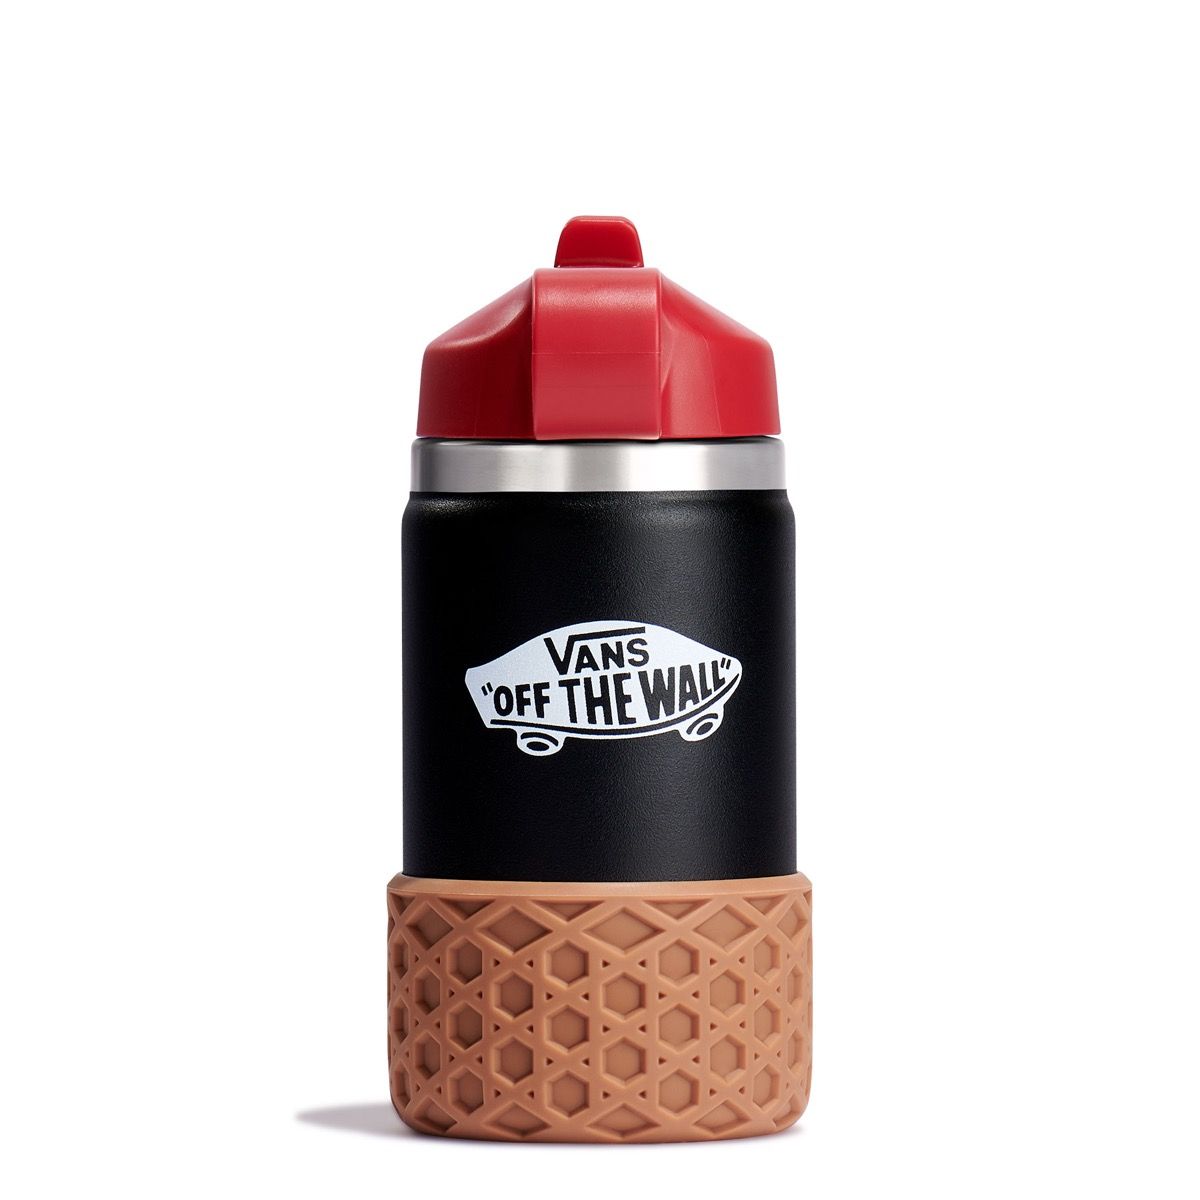 Hydro Flask and Vans Released a Limited Edition Collection